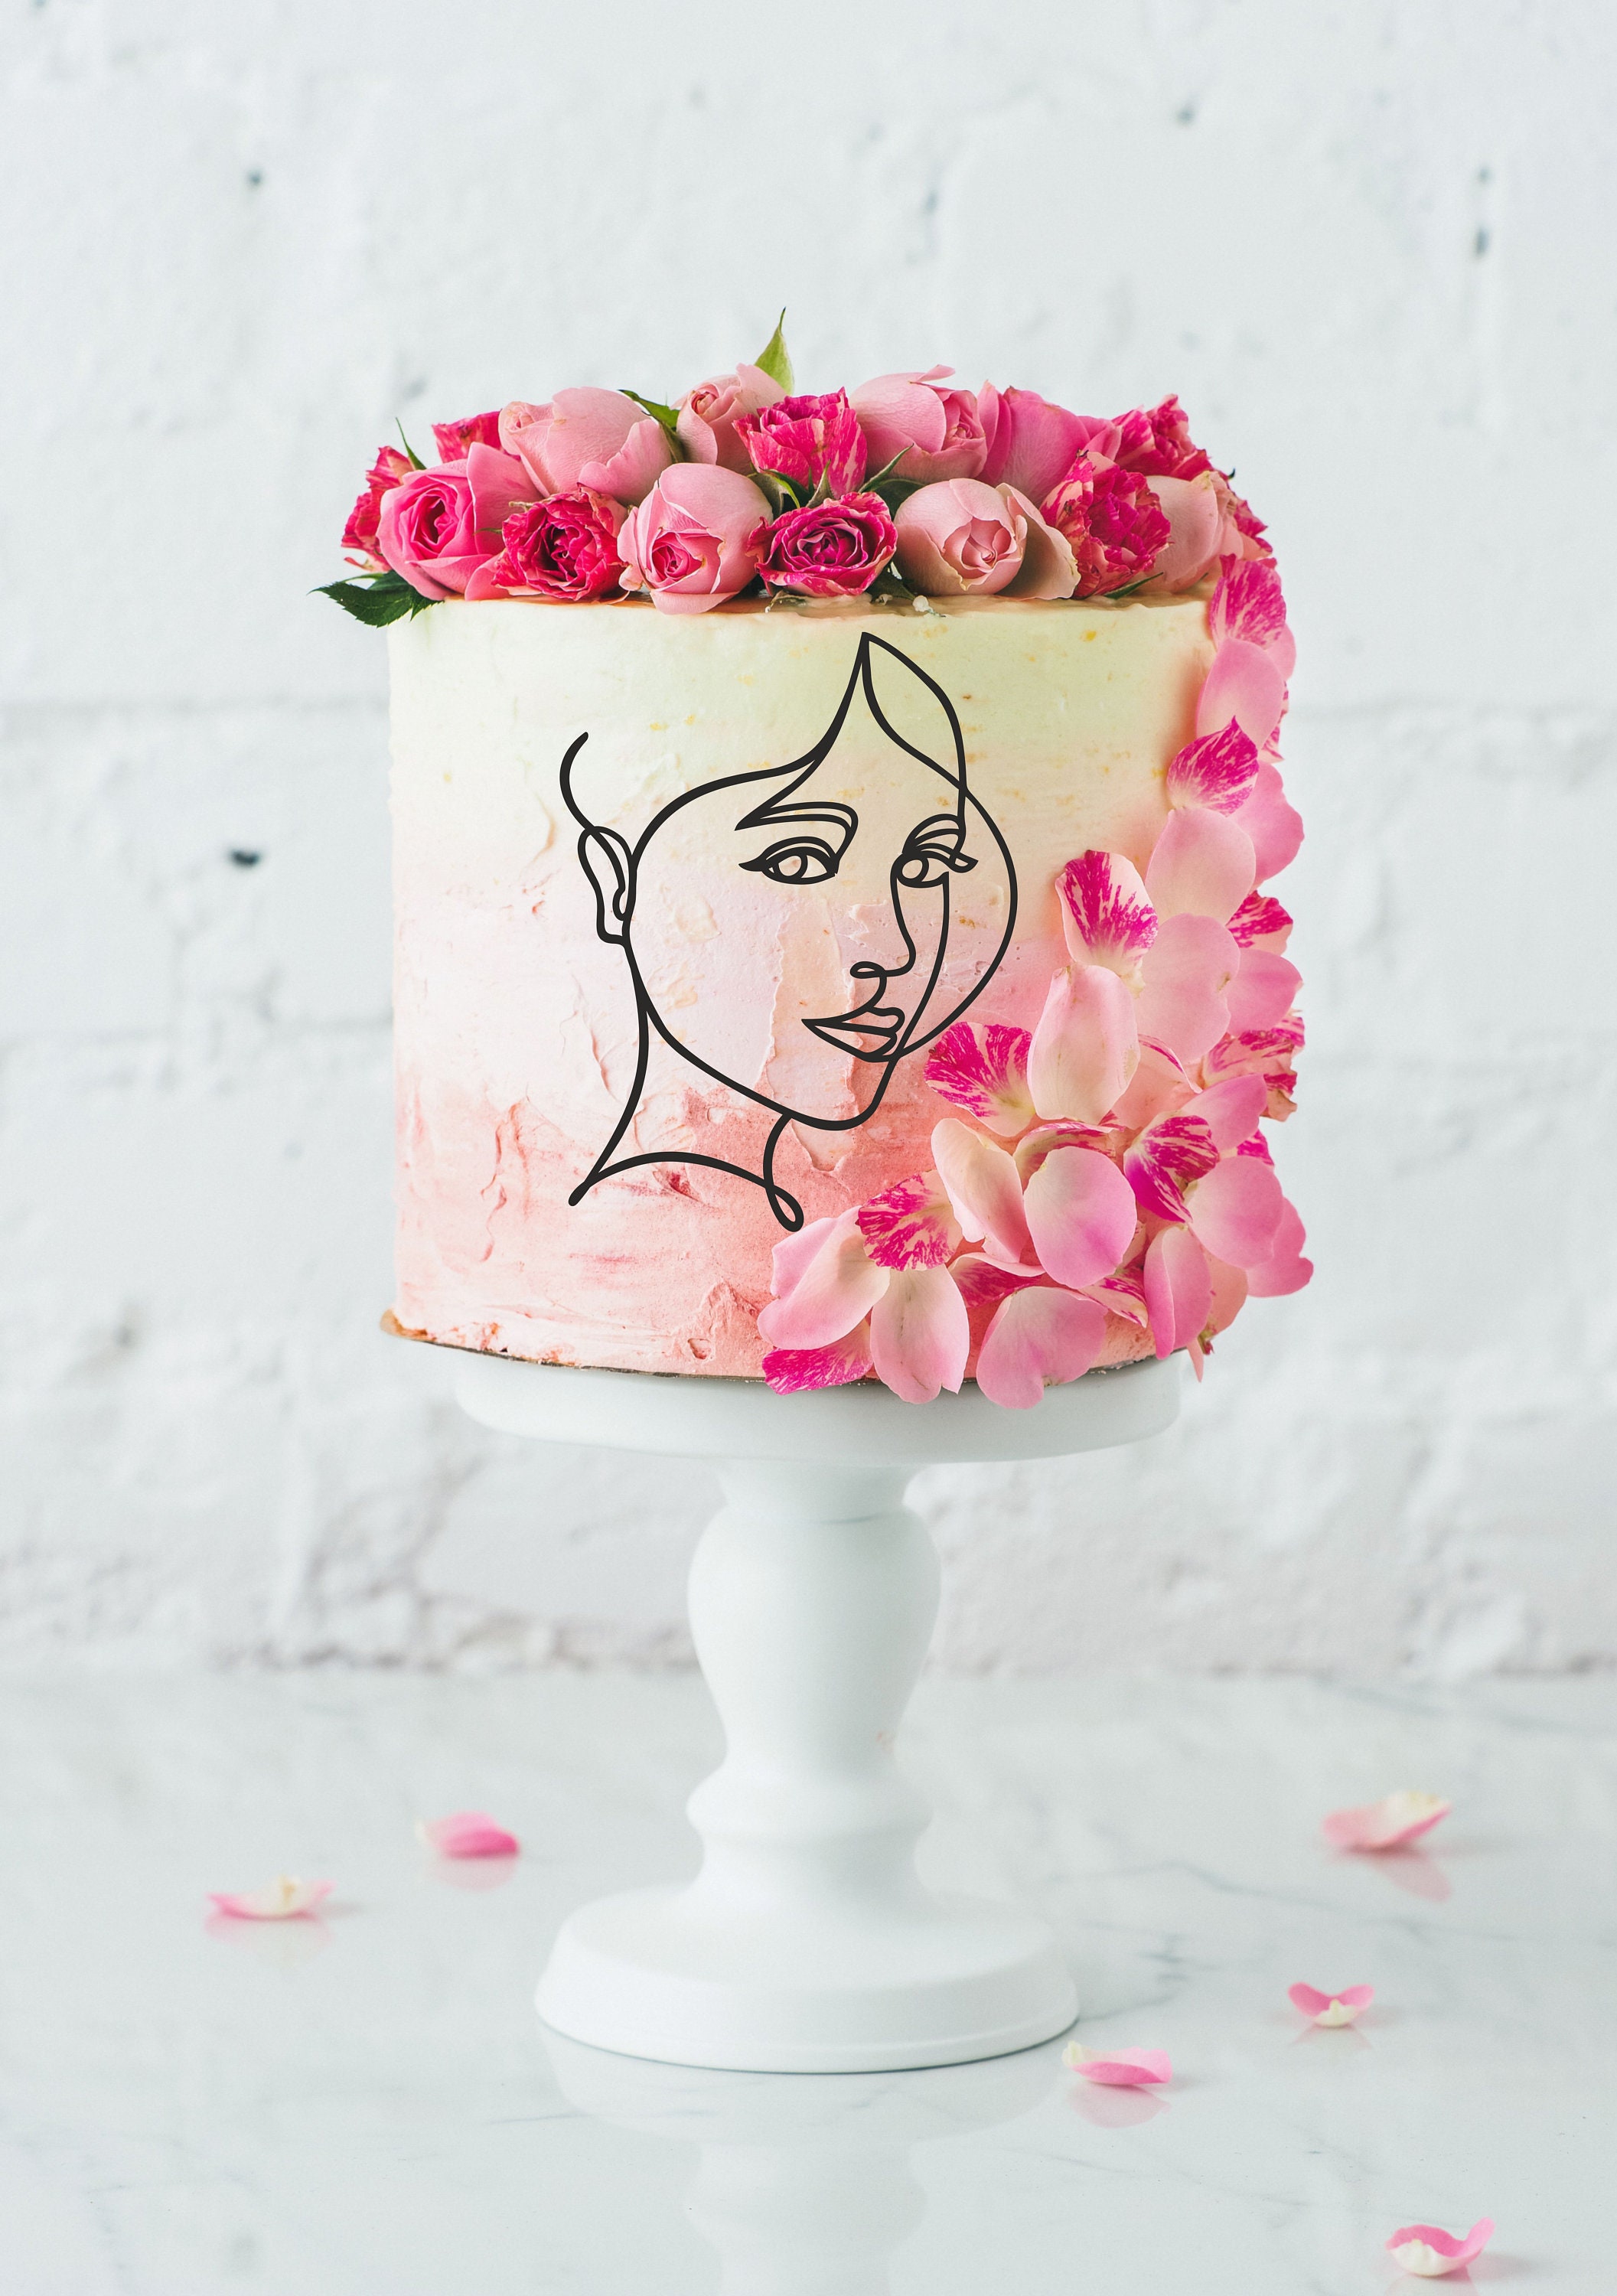 Buy One Line Smile Face Woman Topper Line Art Cake Topper Online in India   Etsy